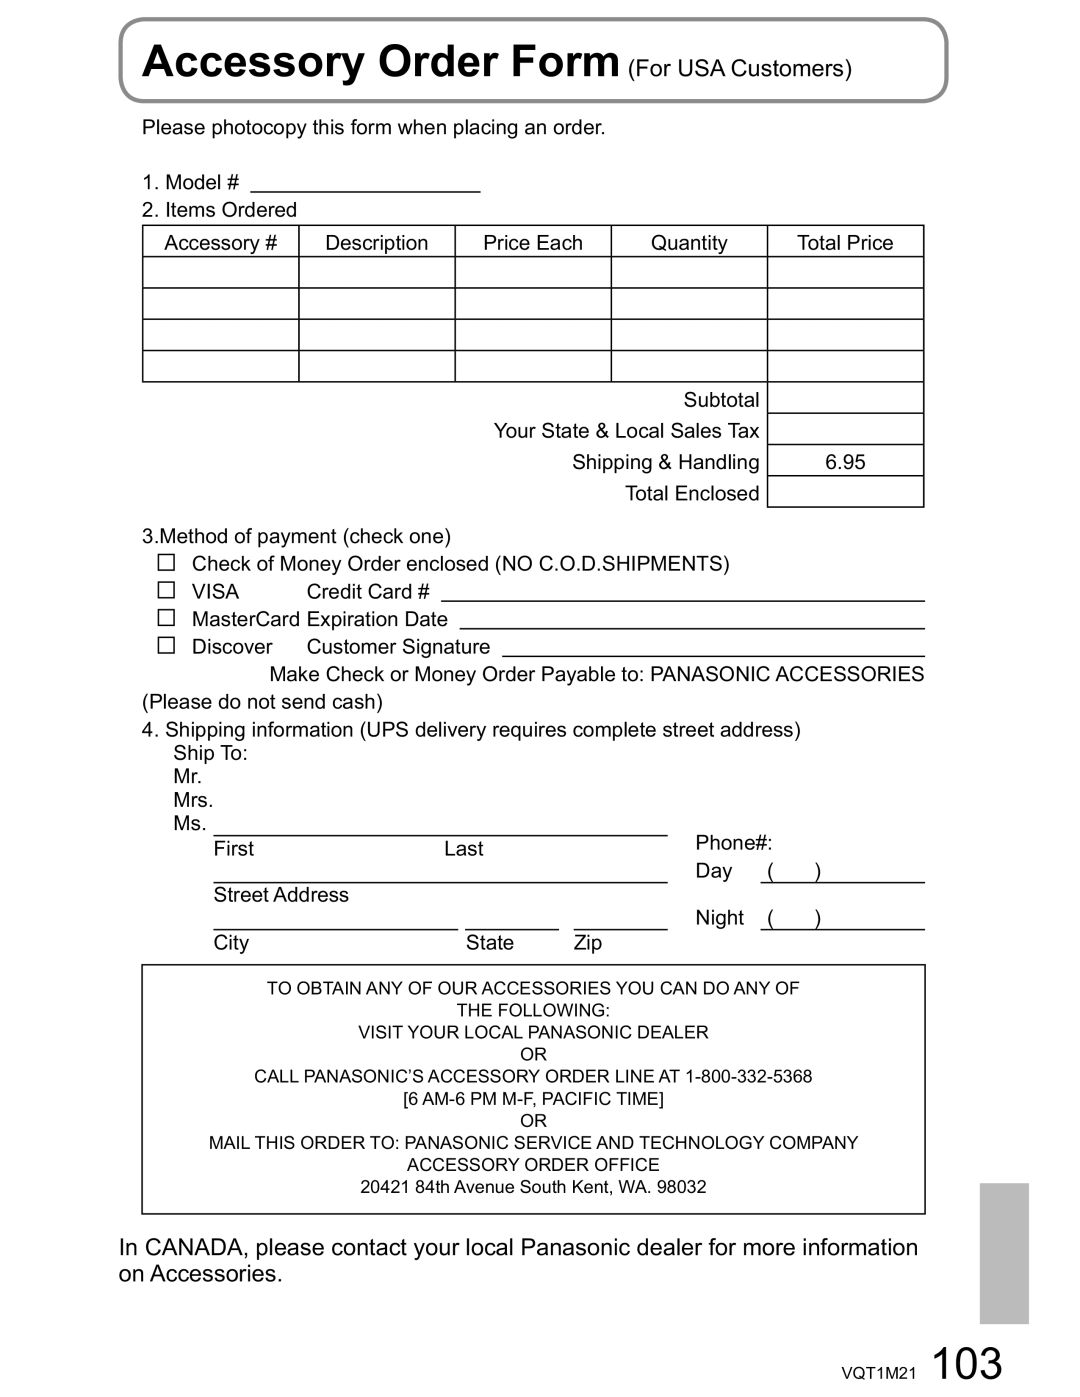 Panasonic SDR-SW20PC operating instructions Accessory Order Form For USA Customers, Visa 